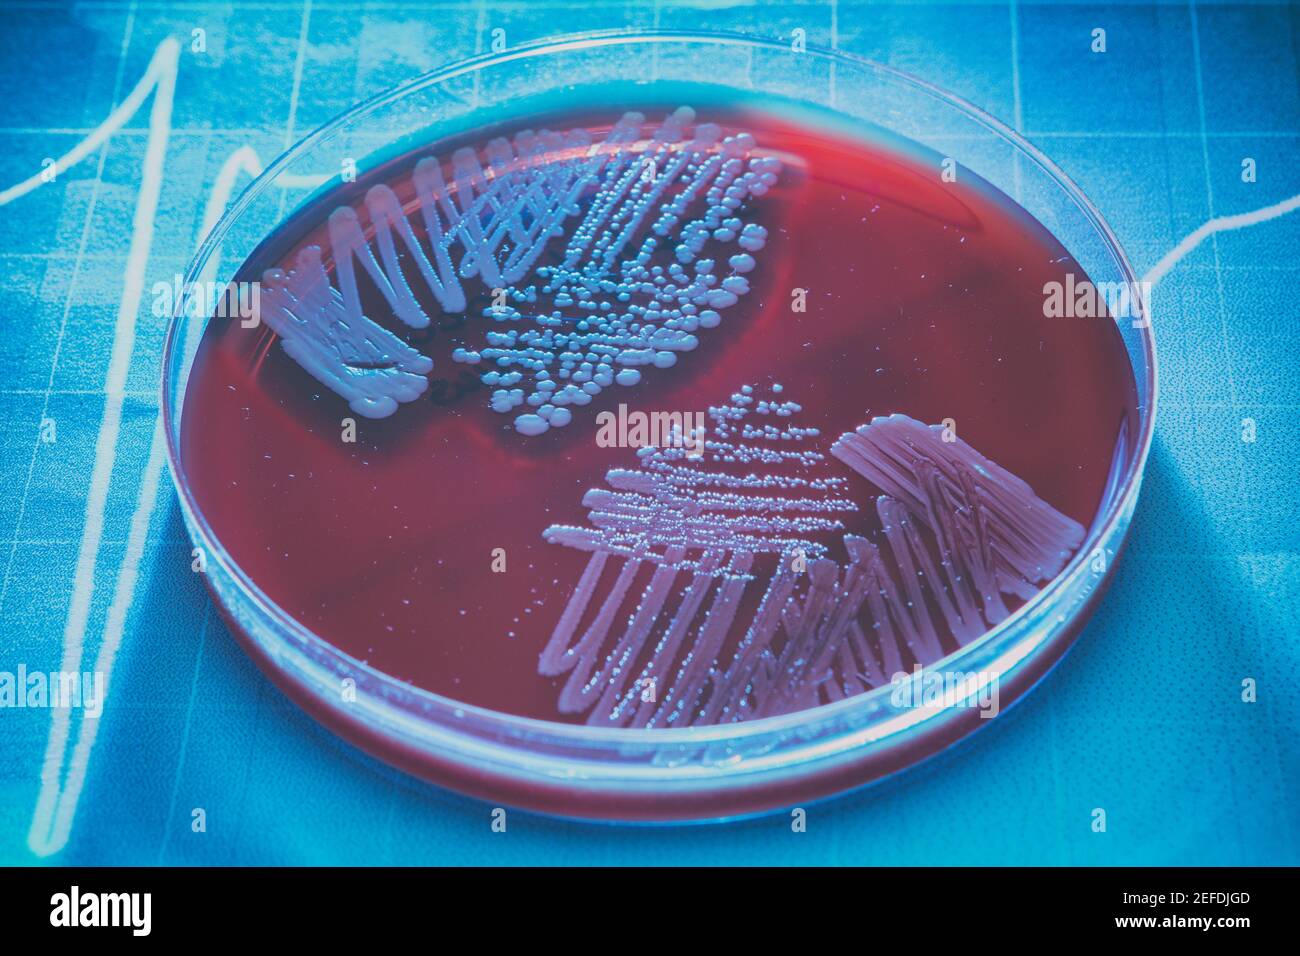 Petri plate with bacteria Steptococcus Phaemolifticus G, Streptococcus Agalactiae, Streptococcus Phaemolifticus Stock Photo